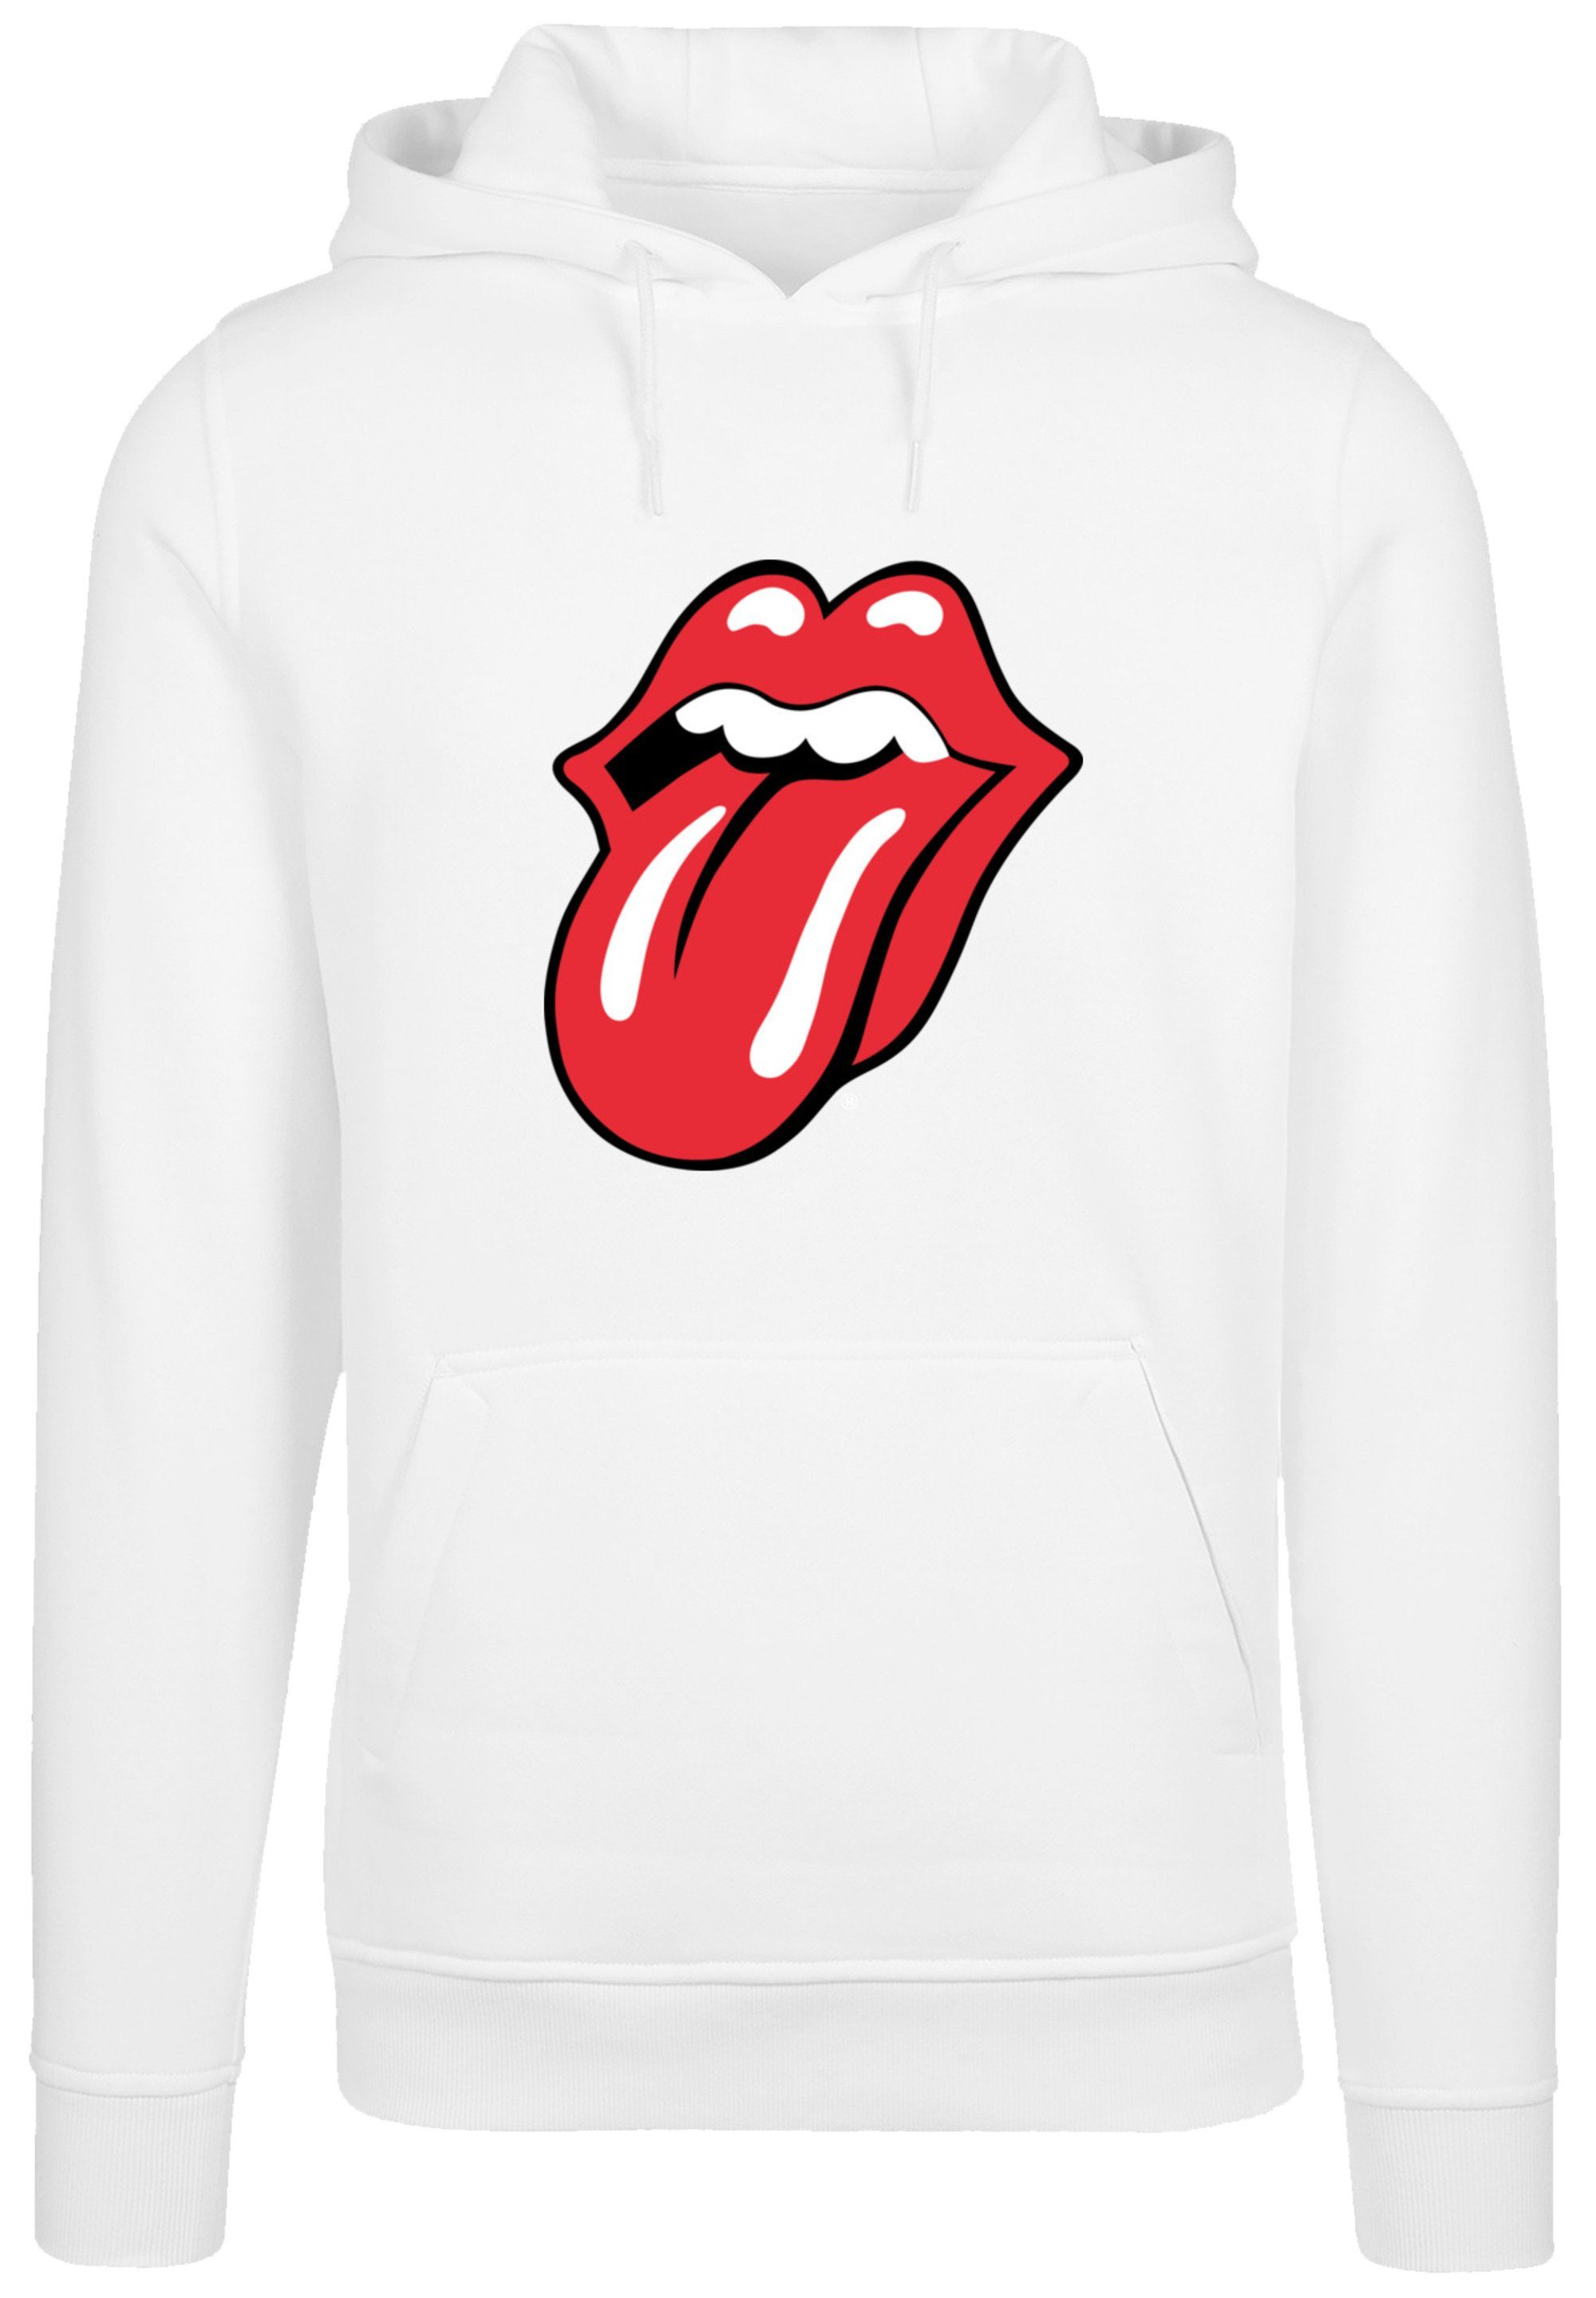 Rock Hoodie, Classic Rolling weiß Bequem The Zunge Stones Warm, Kapuzenpullover F4NT4STIC Musik Band